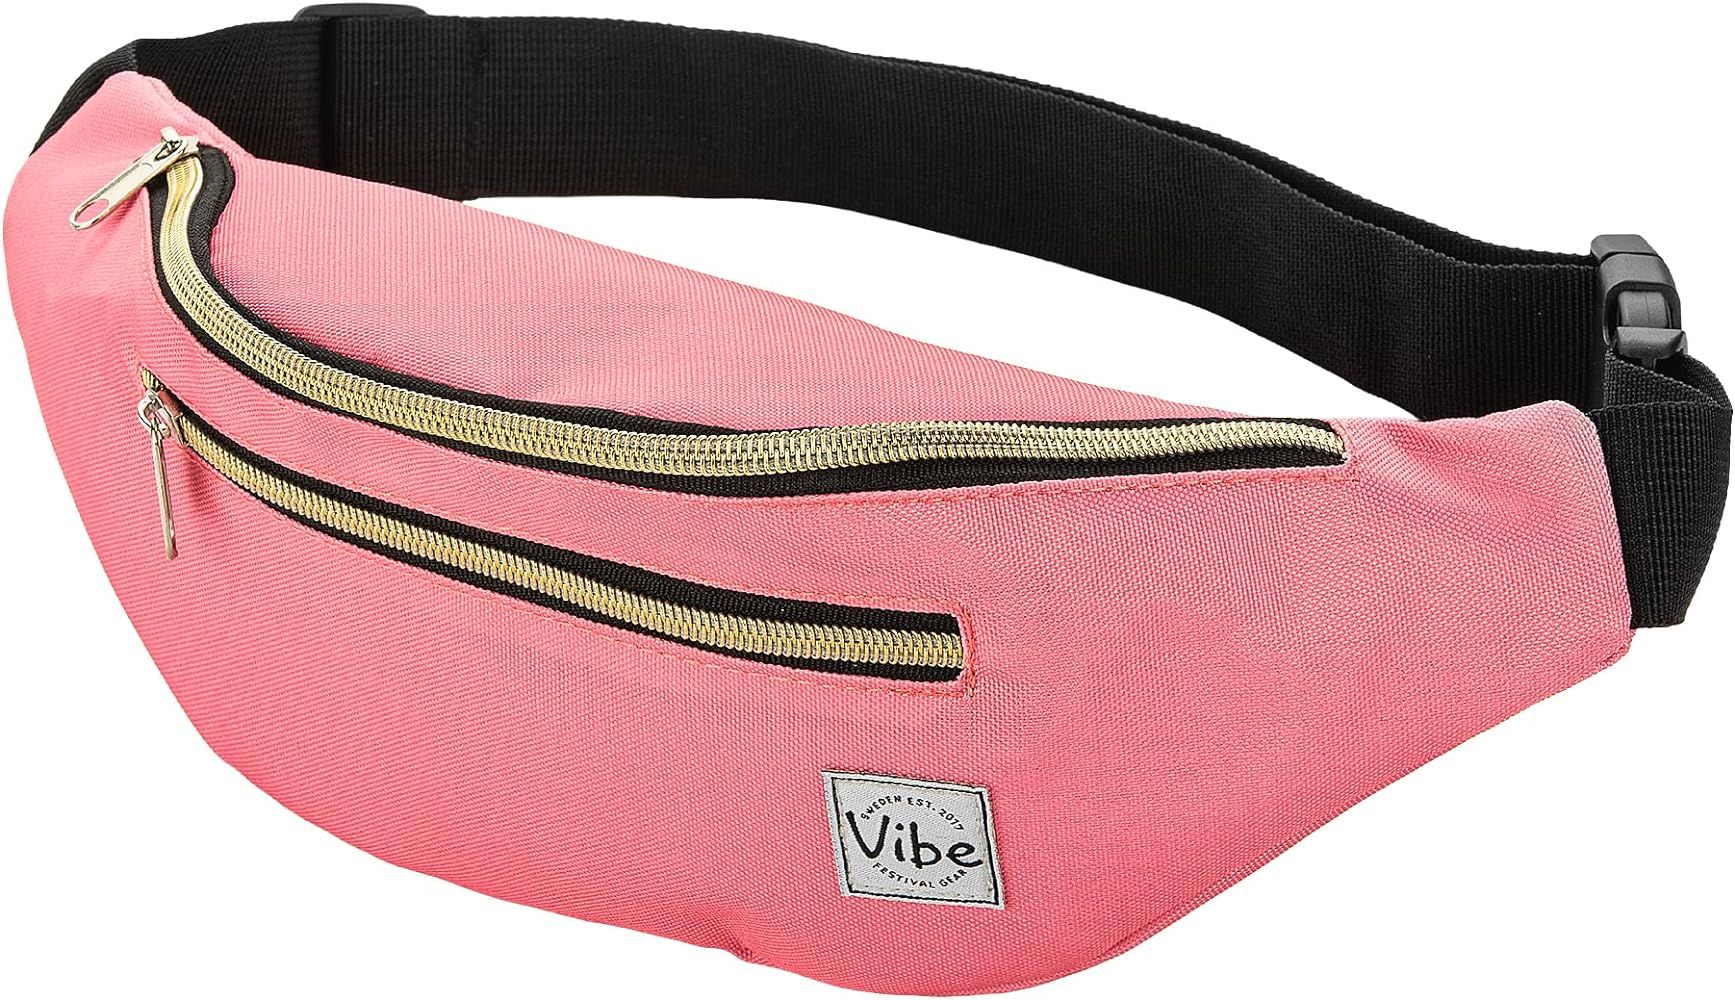 Vibe Festival Gear Fanny Pack for Men Women - Many Prints - Black Holographic Silver Gold Cute Wa... | Amazon (US)